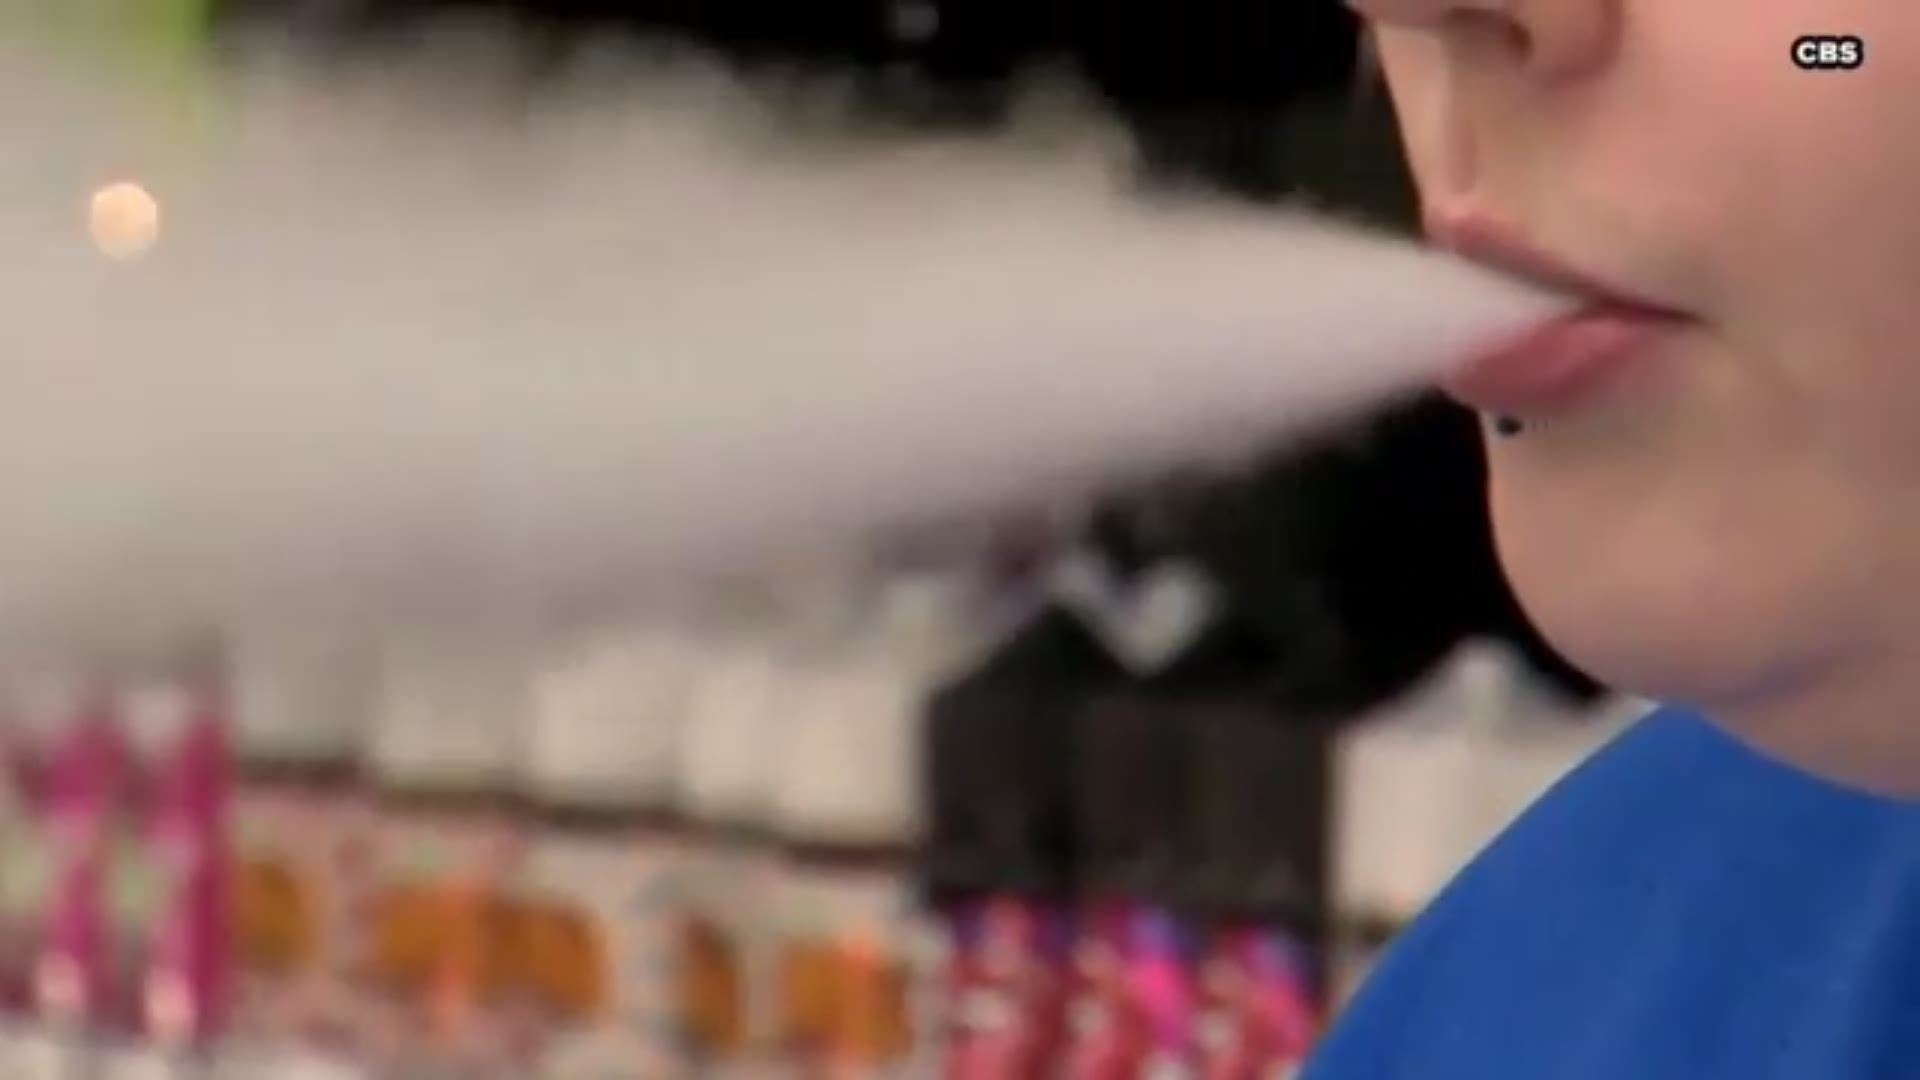 There are new warnings about a possible link between severe lung disease in teenagers and e-cigarettes and vaping. Minnesota is now the third state where serious lung injuries were reported in the last month.